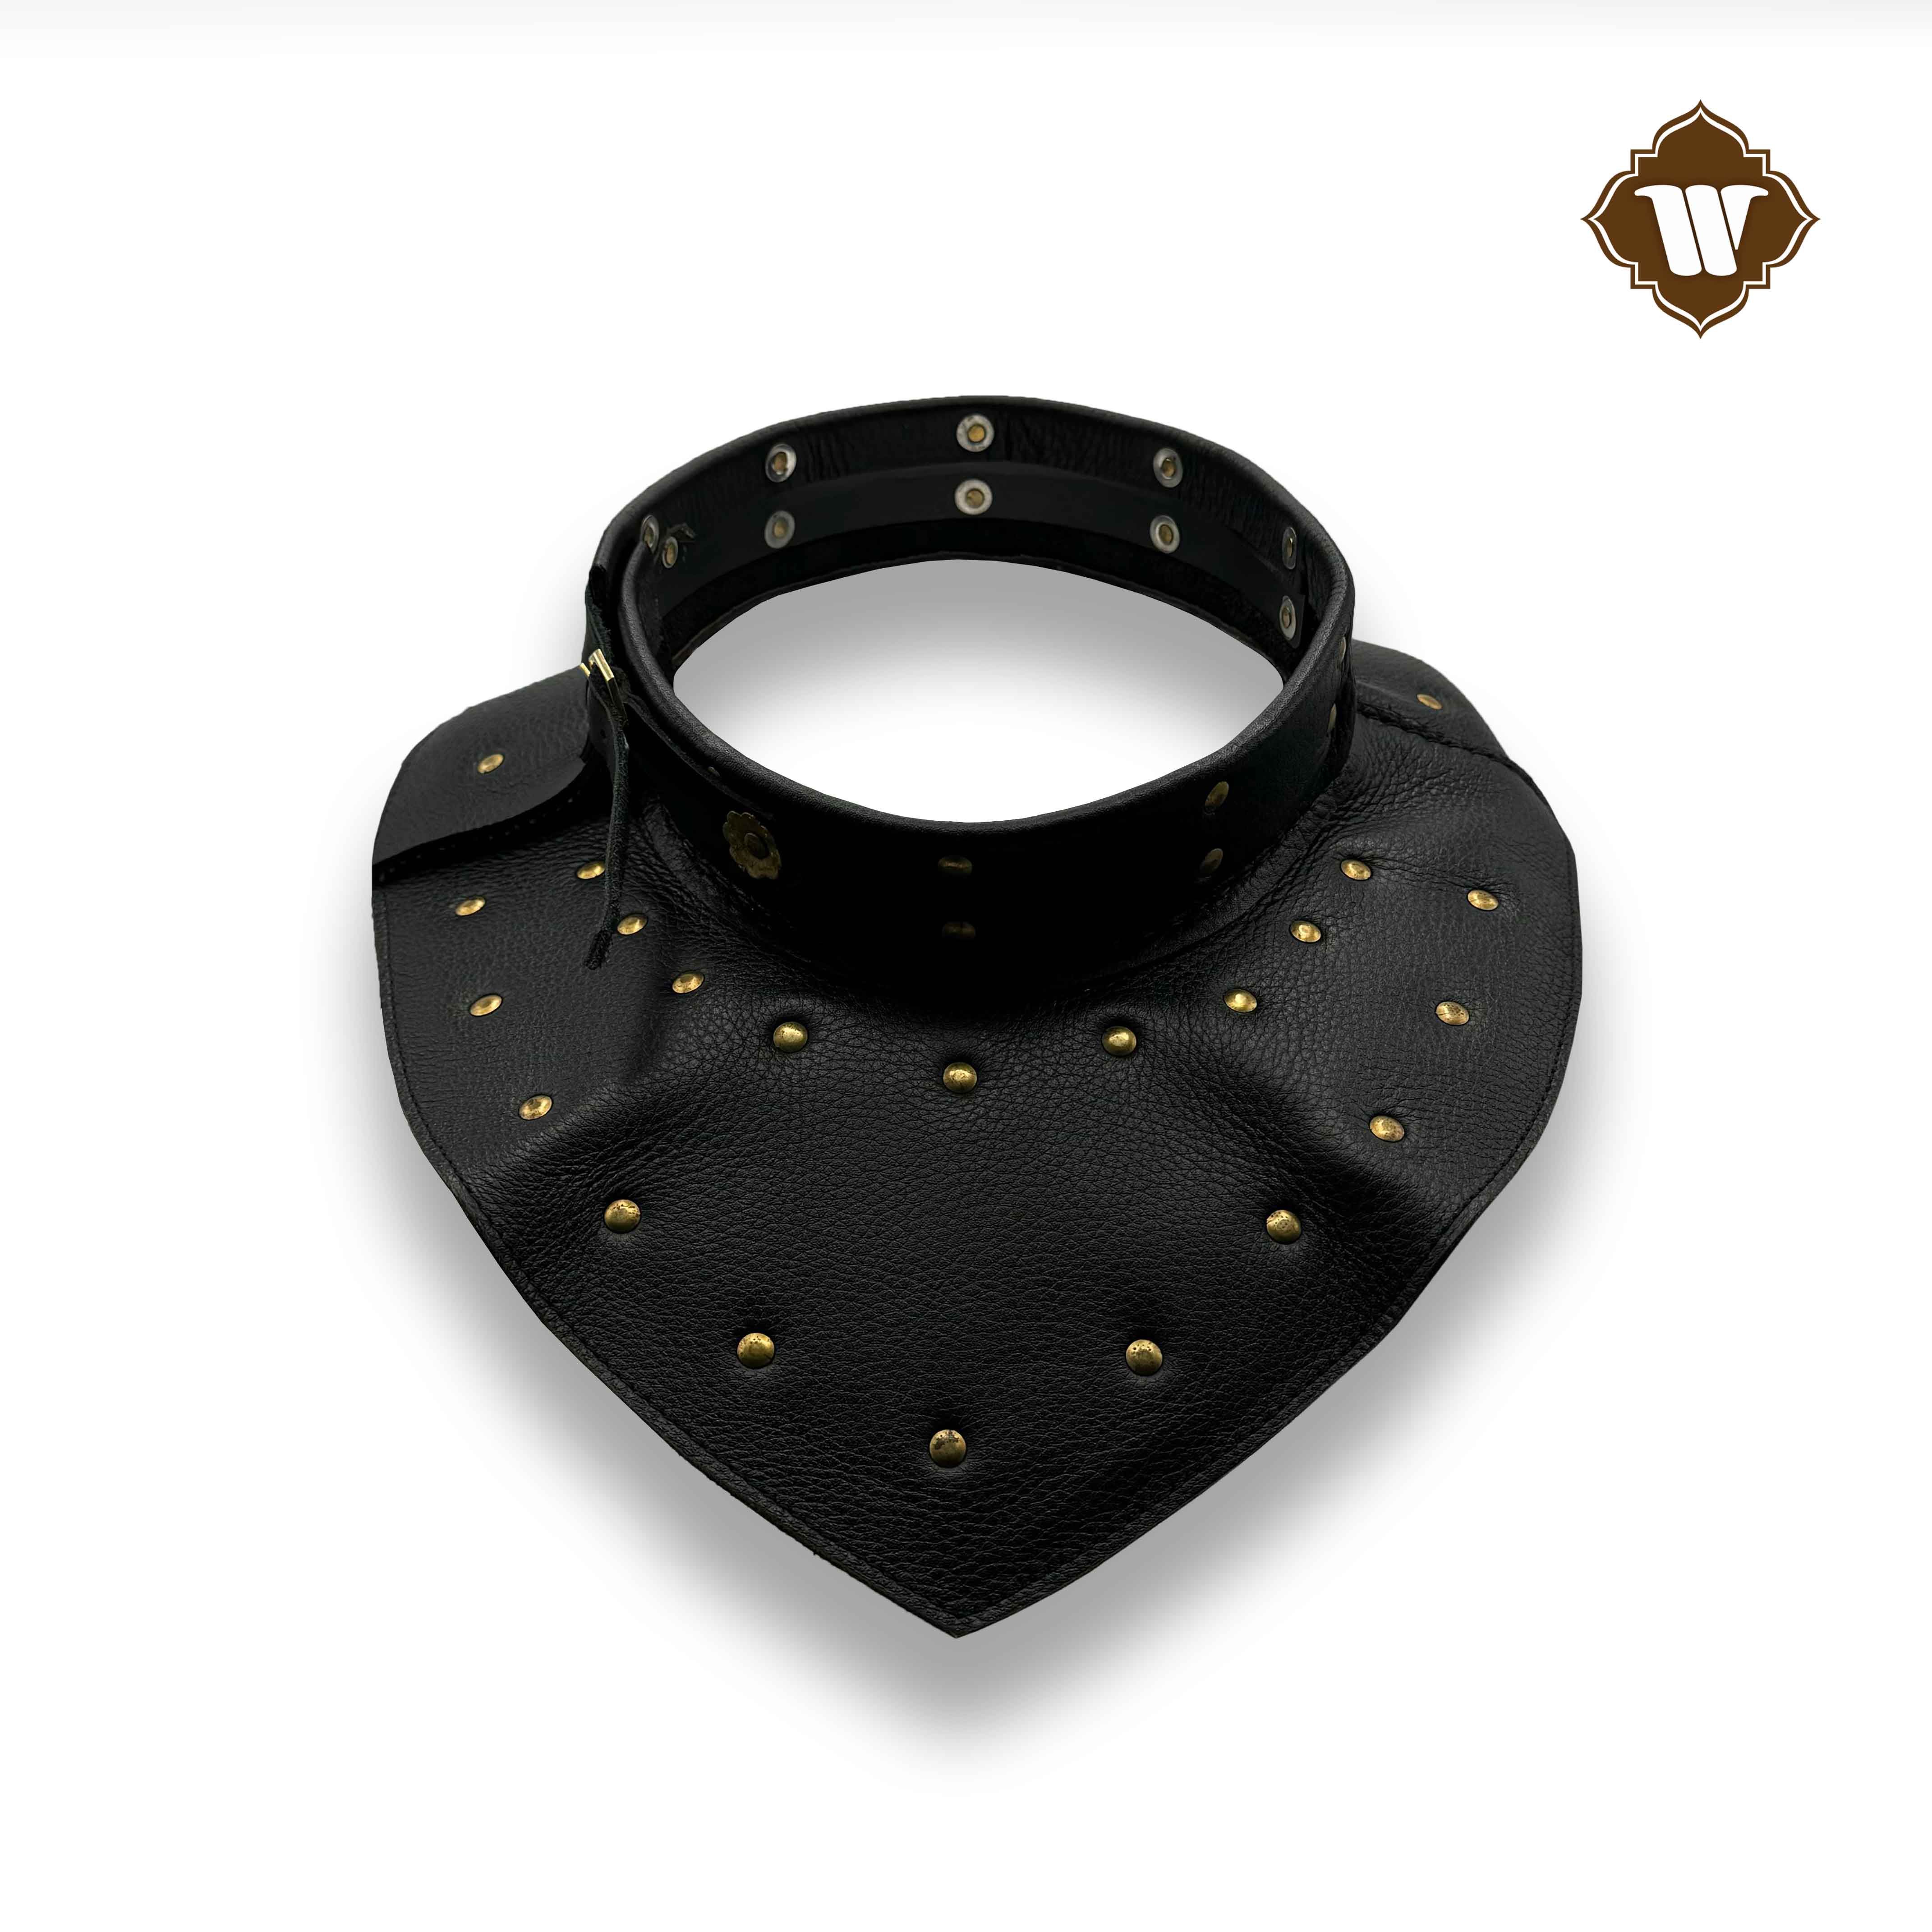 Medieval Leather Brigandine Gorget with Stainless Steel Plates - HEMA/WMA Combat Neck Protection